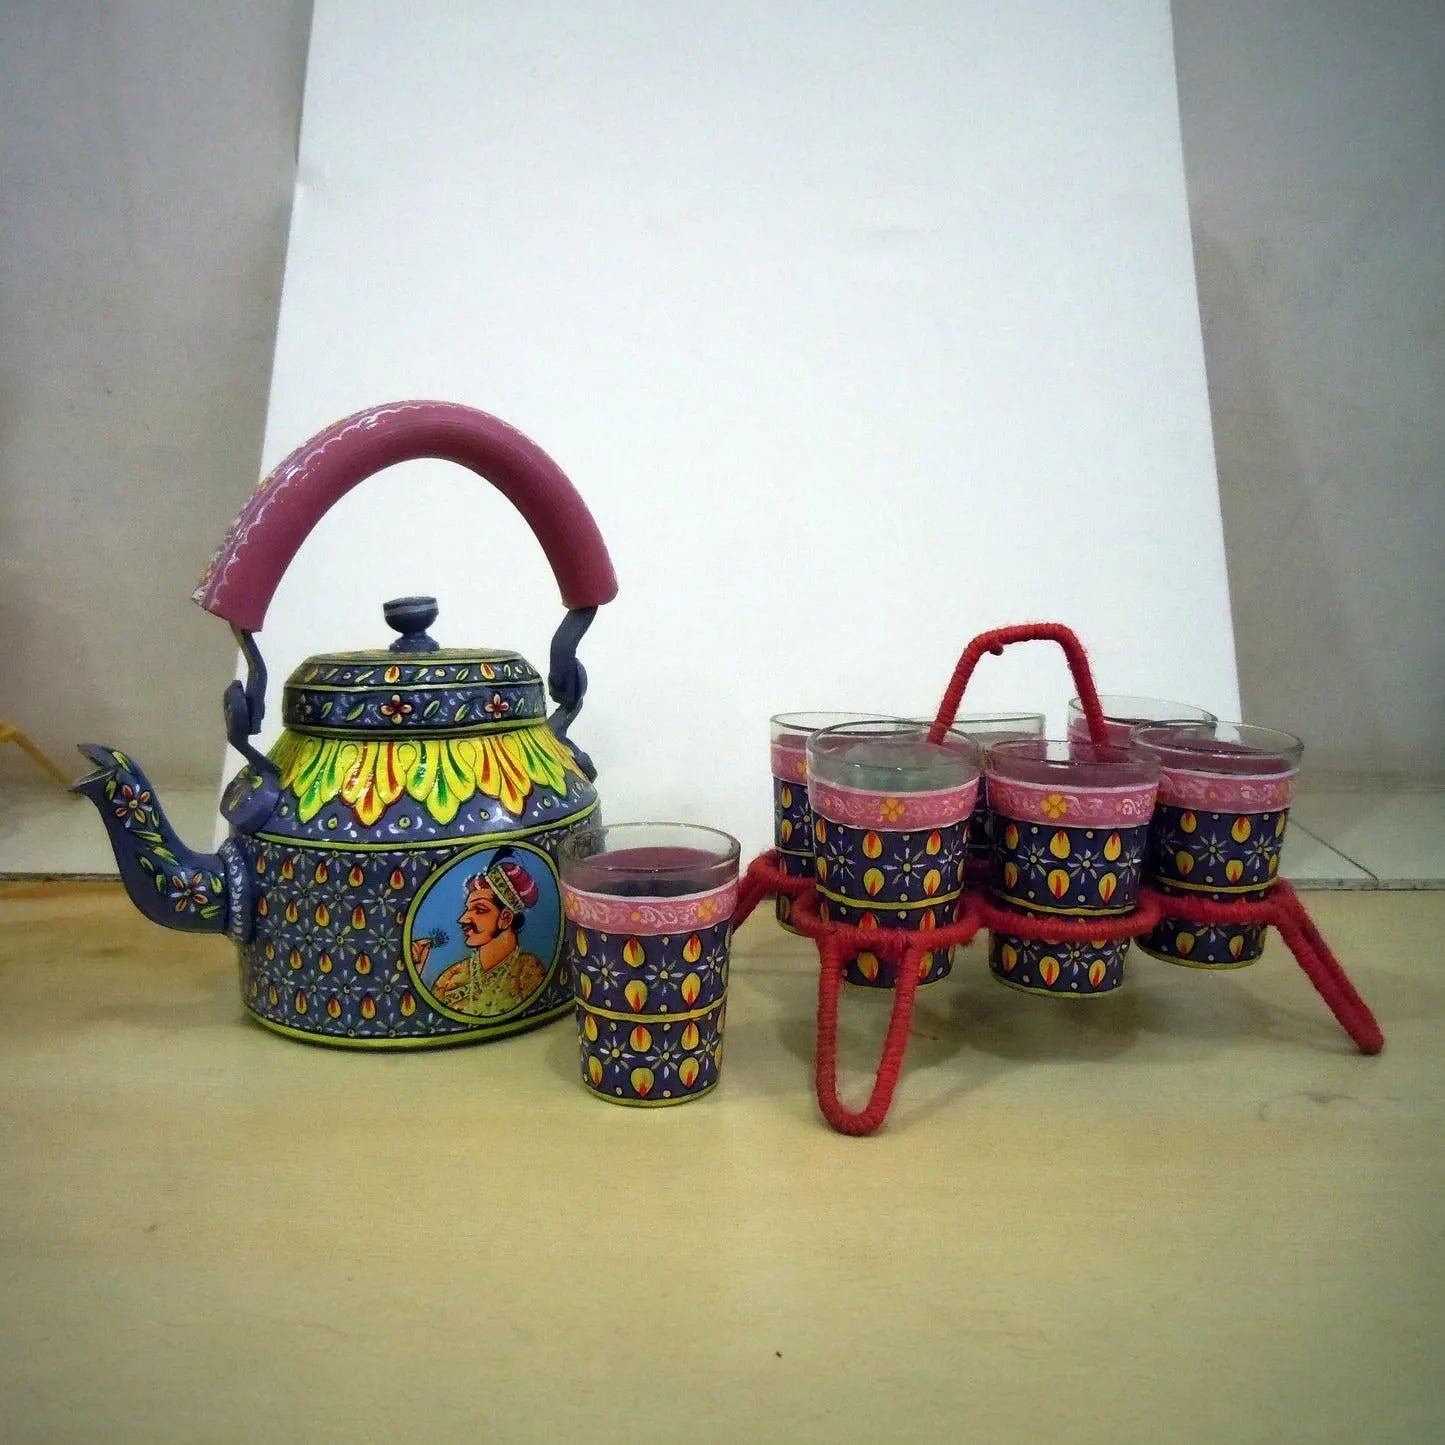 Kaushalam Tea Kettle with six glasses and stand: King & Queen II